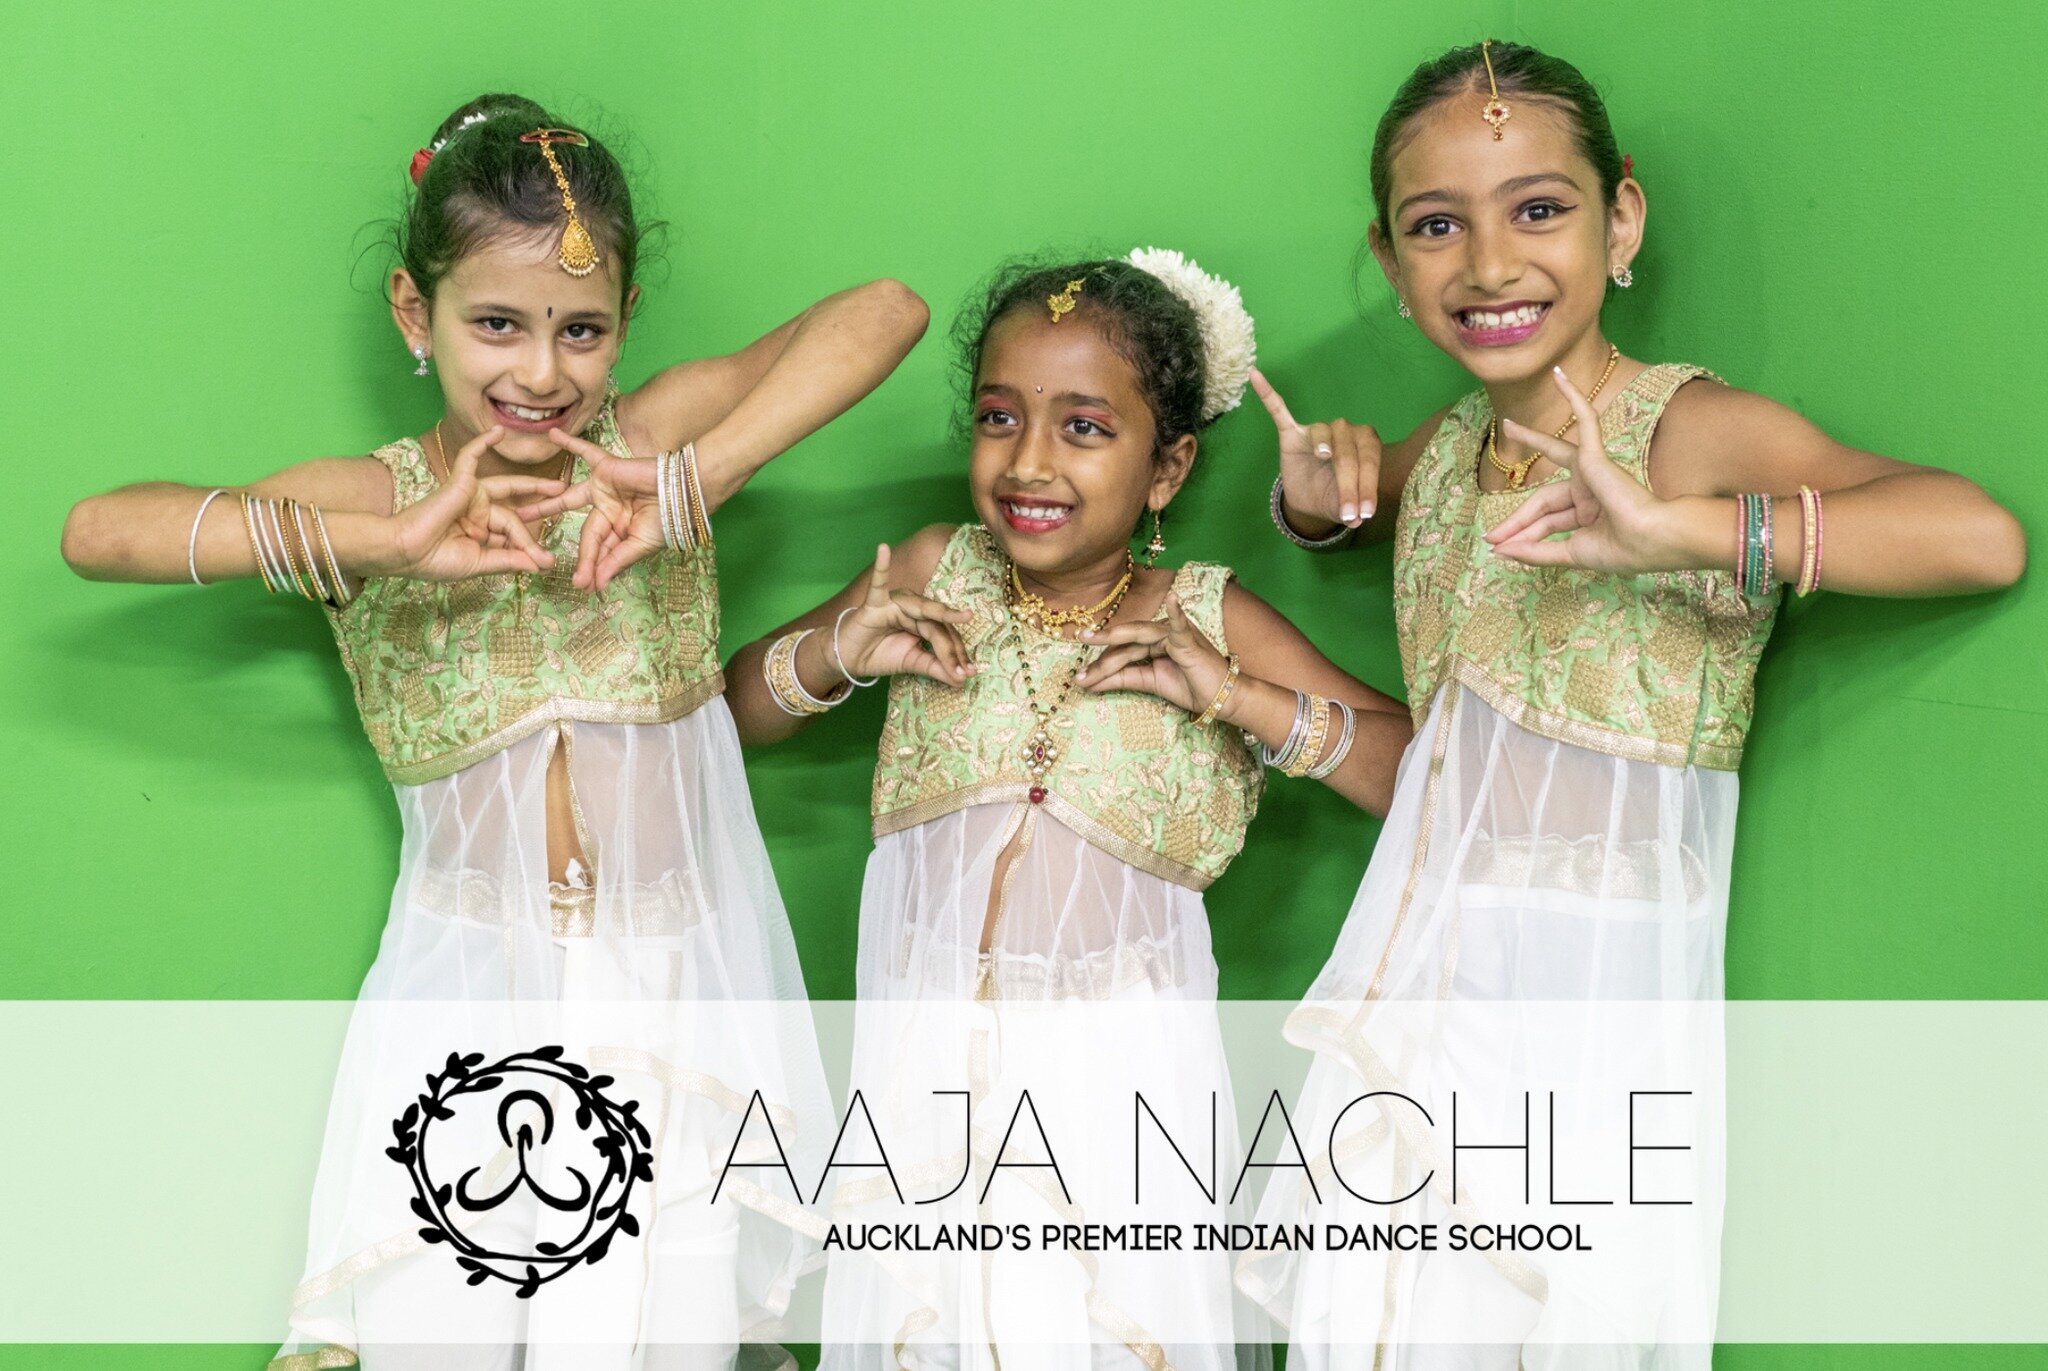 Important update about TAPAC classes for Term 3!

- TAPAC classes are going to have a delayed start
- Our Bollywood Beginner and BollyFusion classes are moving to TAPAC 
- You will need to re-enrol and learn about comms/invoicing. Please keep an eye 